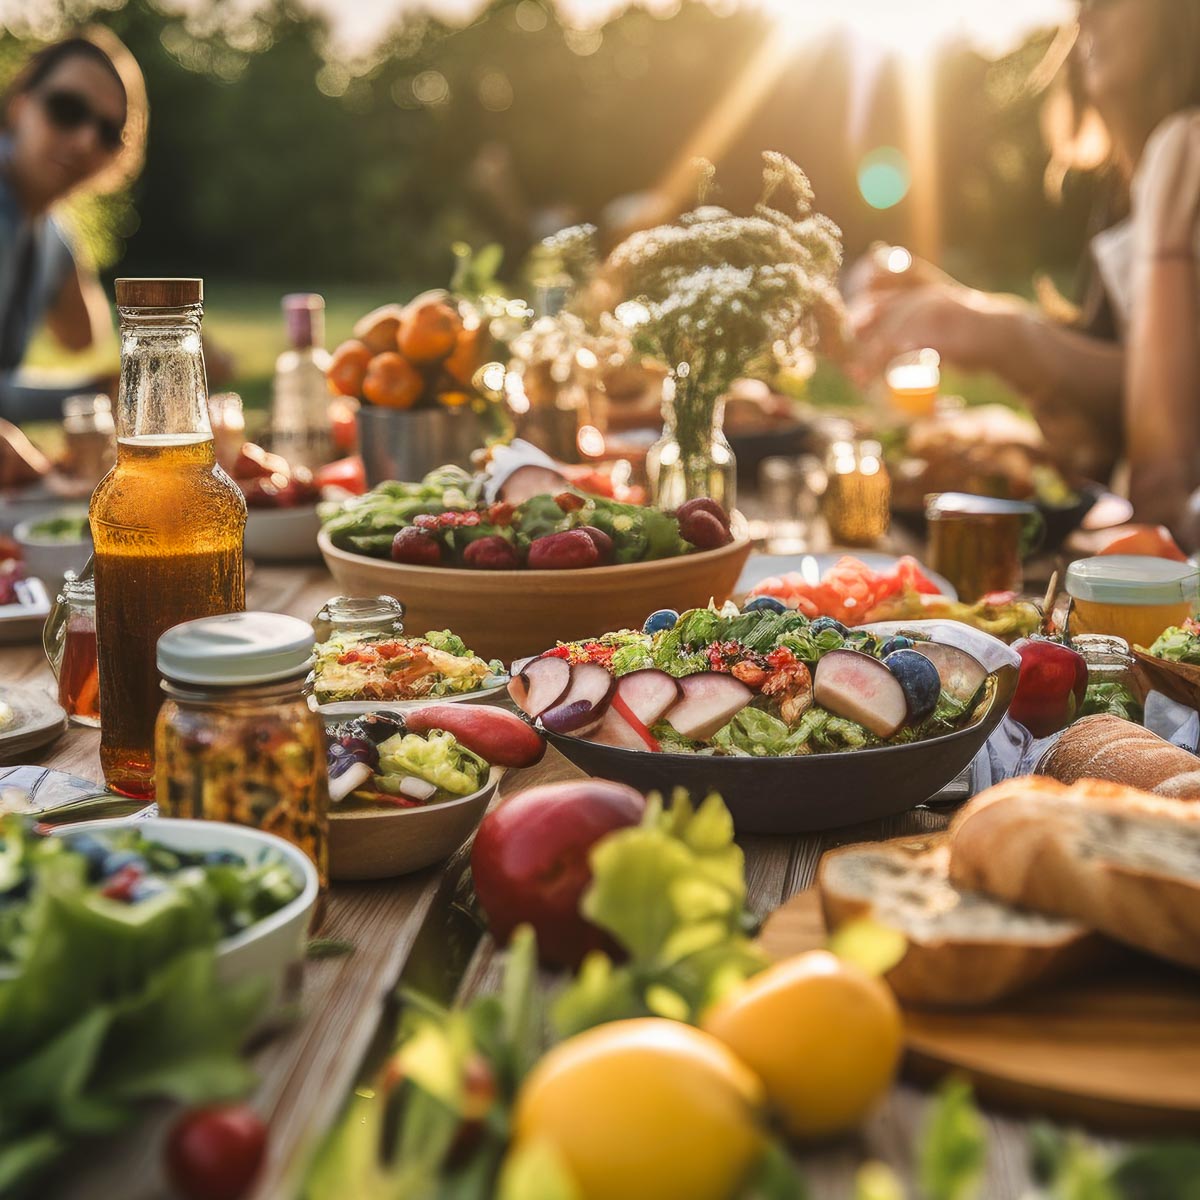 outdoor table full of whole food plant-based recipes and people ready to eat in evening.